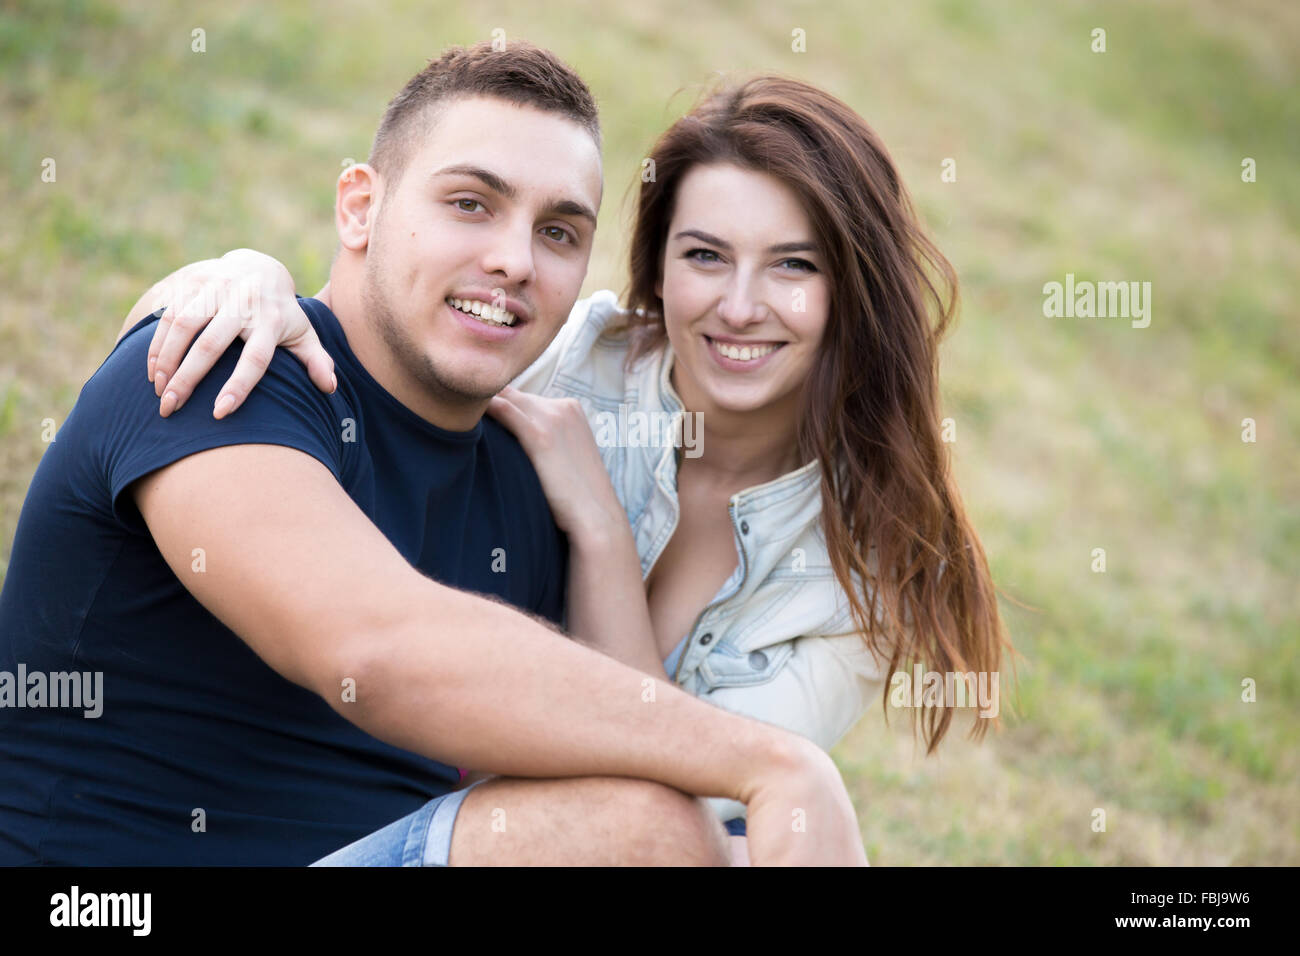 Portrait of beautiful happy smiling young couple on a date embracing, sitting together on grass in park on summer day Stock Photo